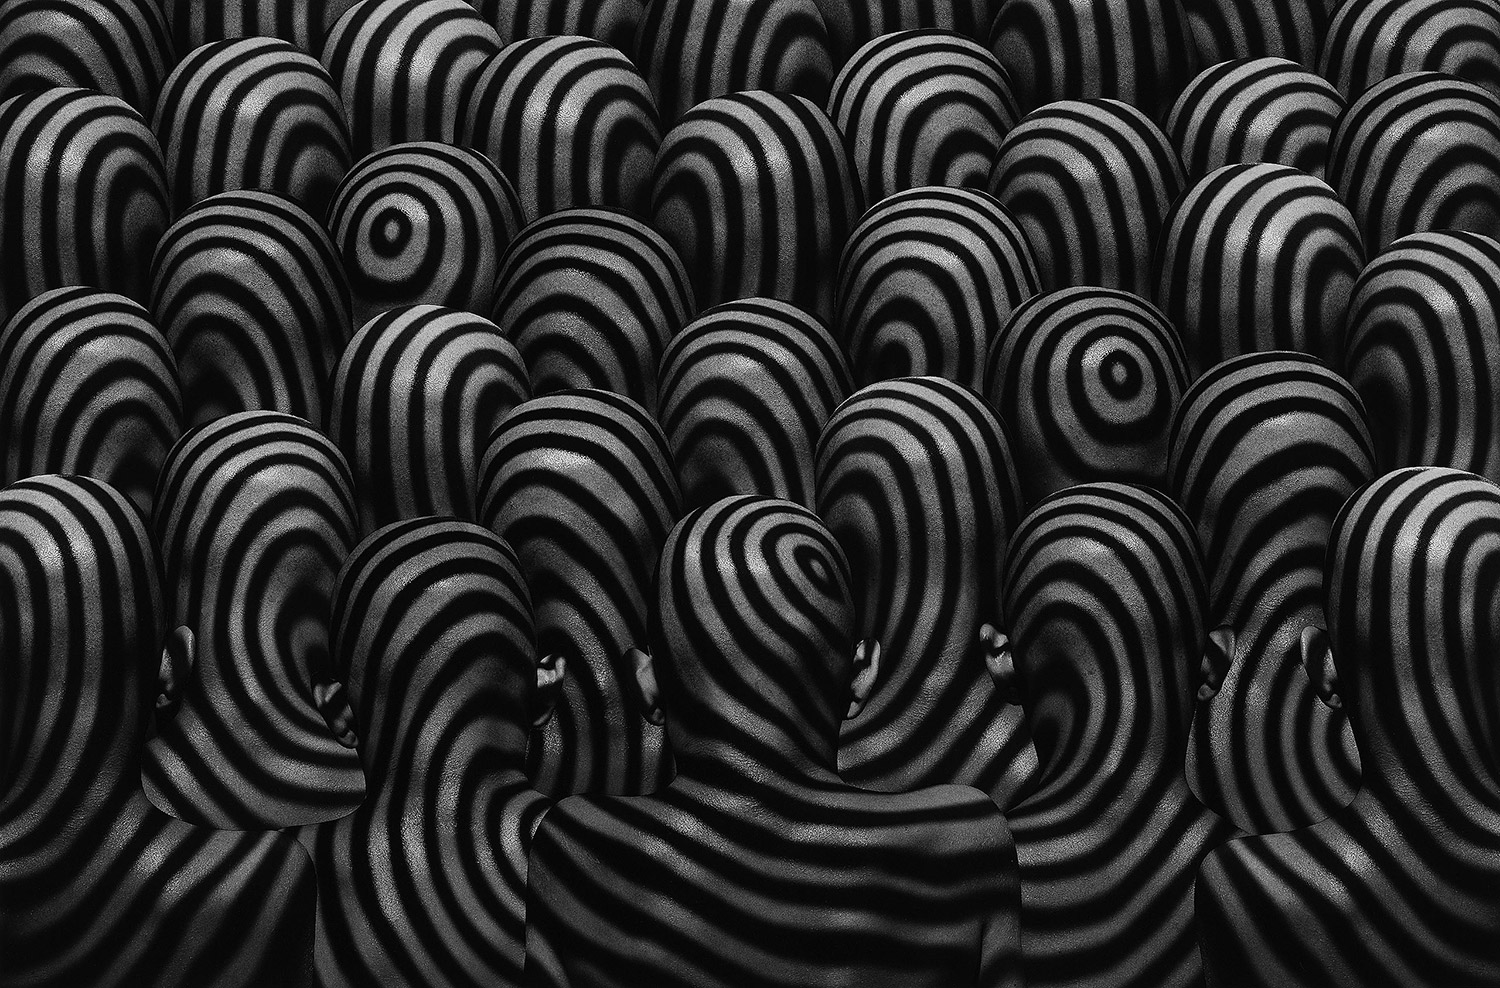 Misha Gordin - crowd with swirl patterns on heads and backs